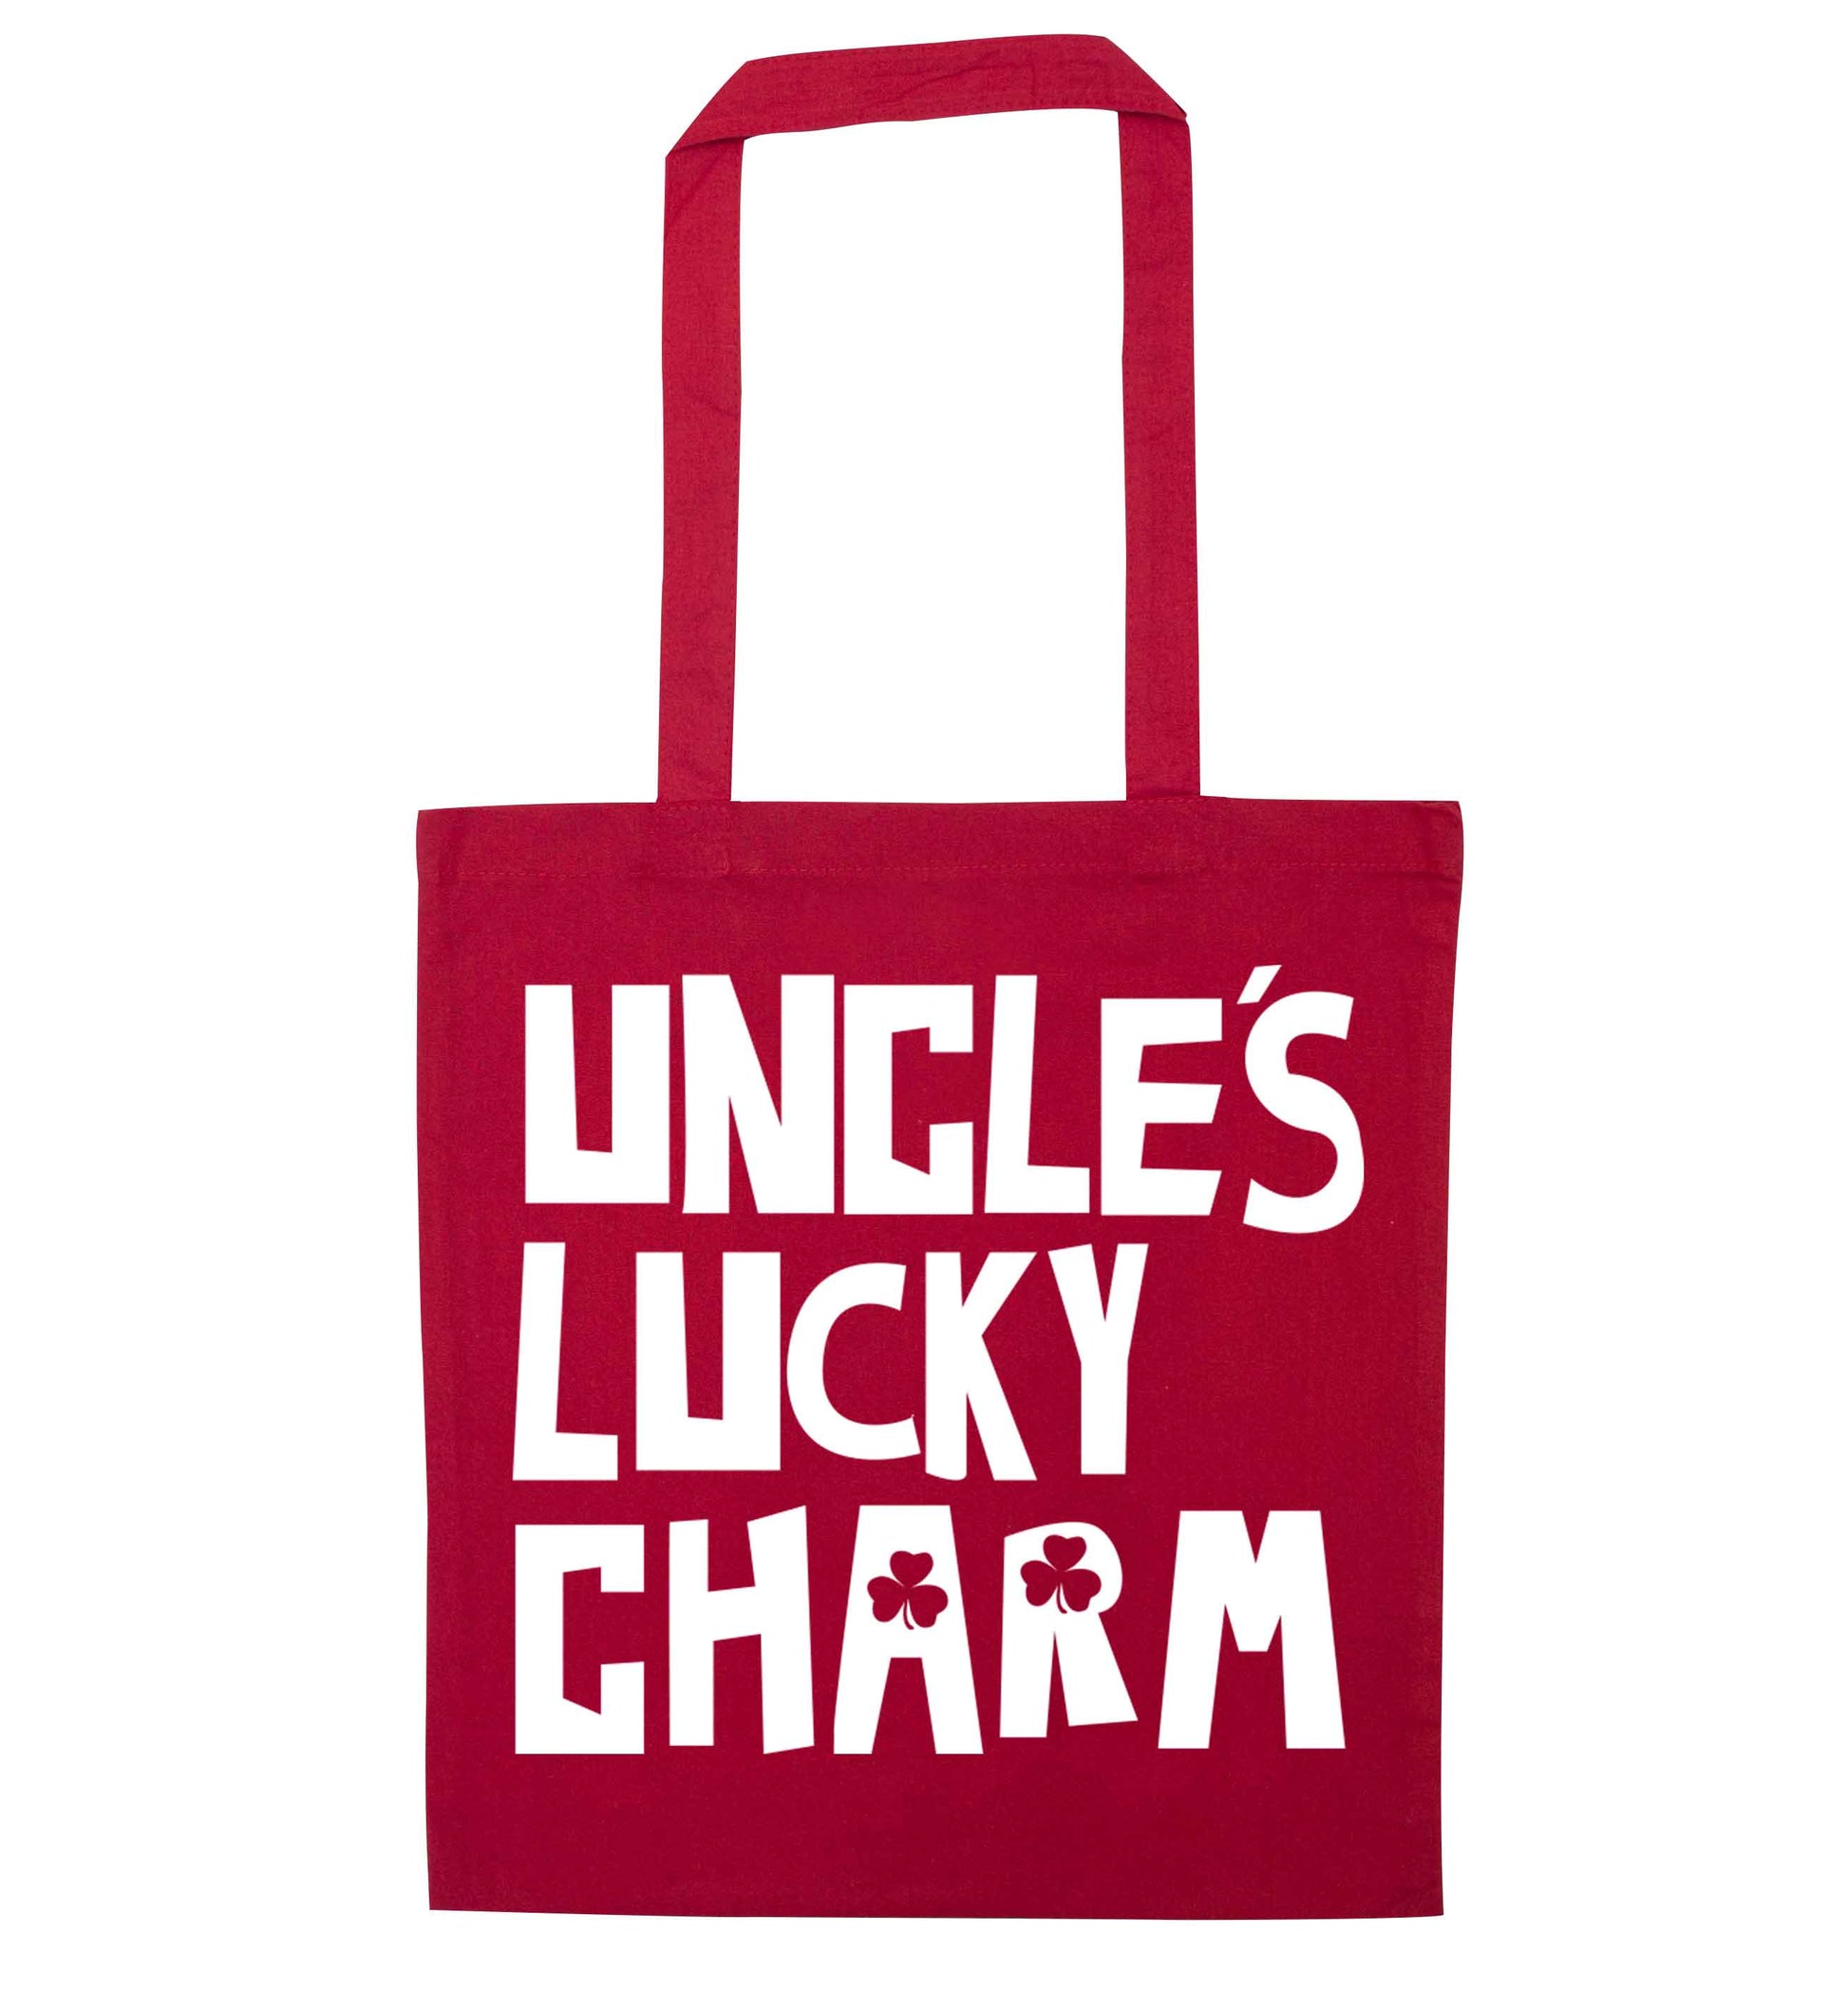 Uncles lucky charm red tote bag